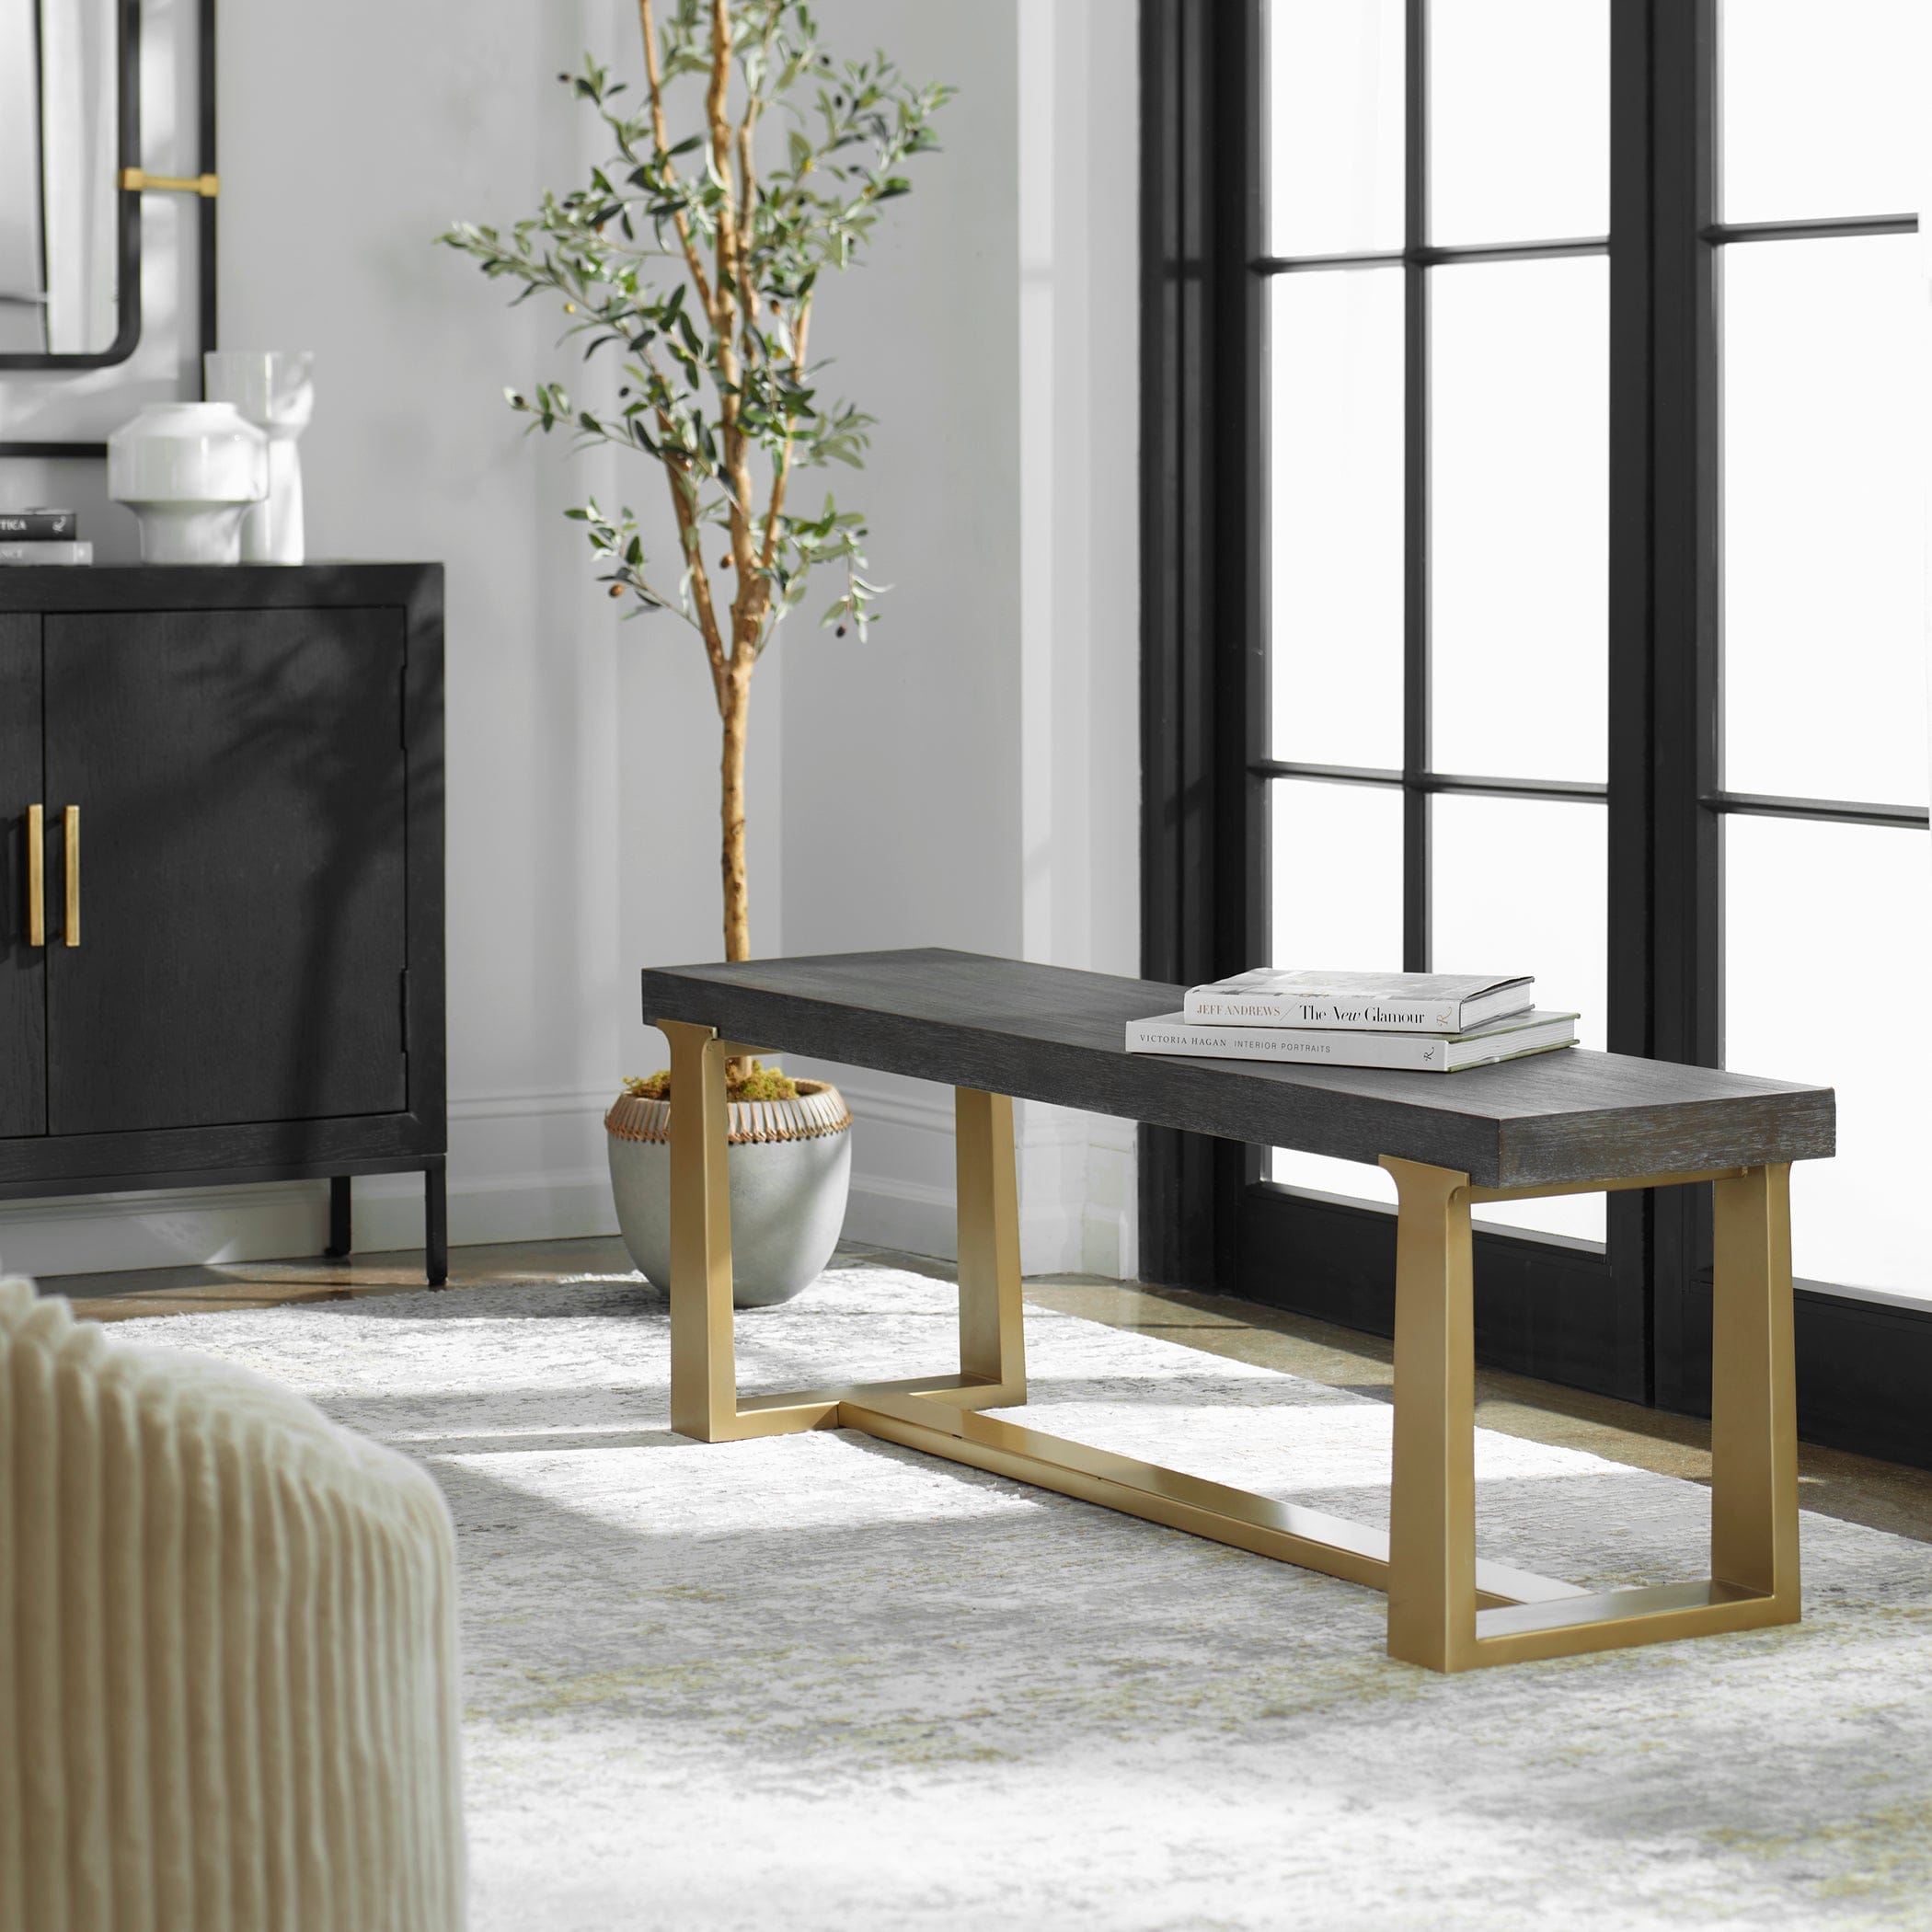 Voyage Brass And Wood Bench Uttermost